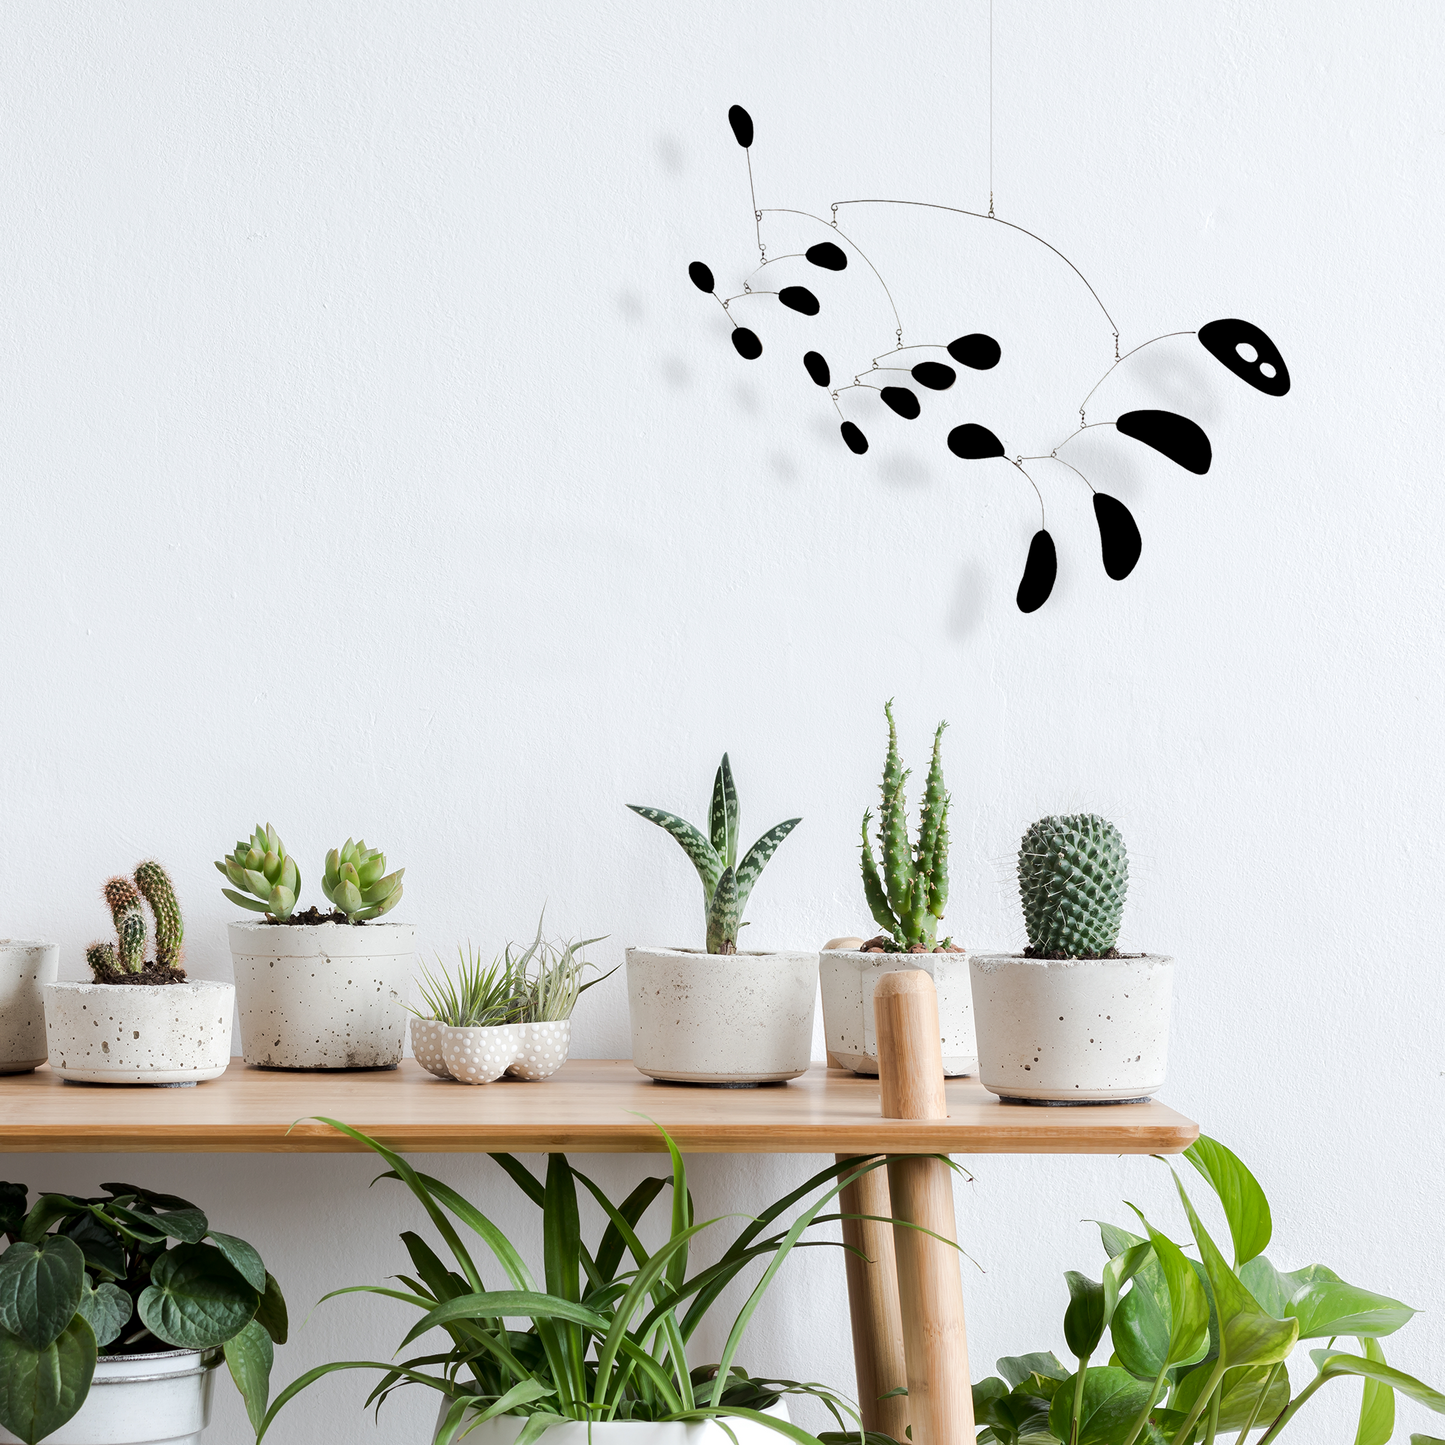 HipCat kinetic art mobile in black with succulents and cactus plants  by AtomicMobiles.com